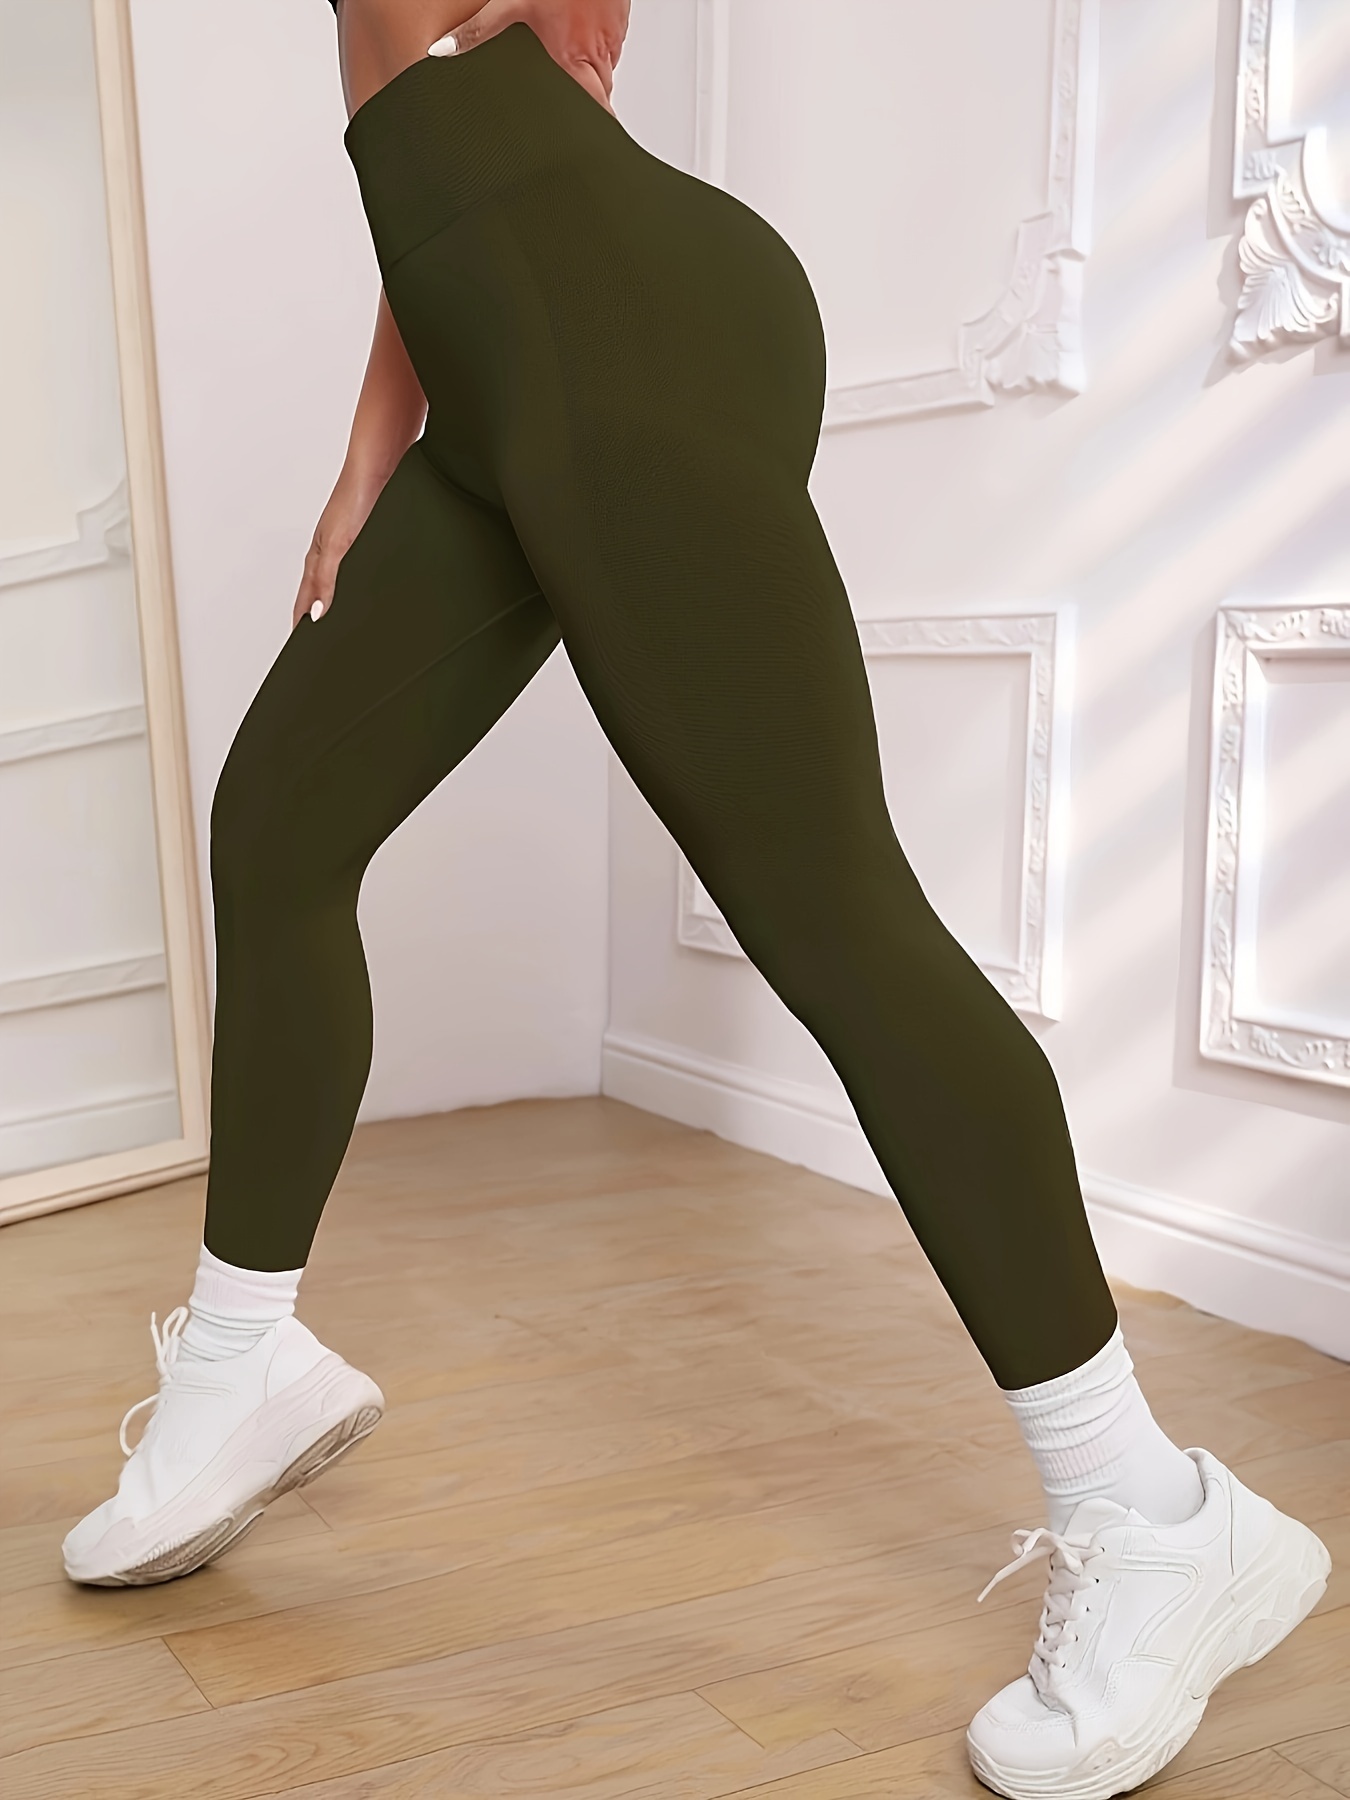 Women's High-Waisted Seamless Yoga Leggings for Fitness, Running, and Sports